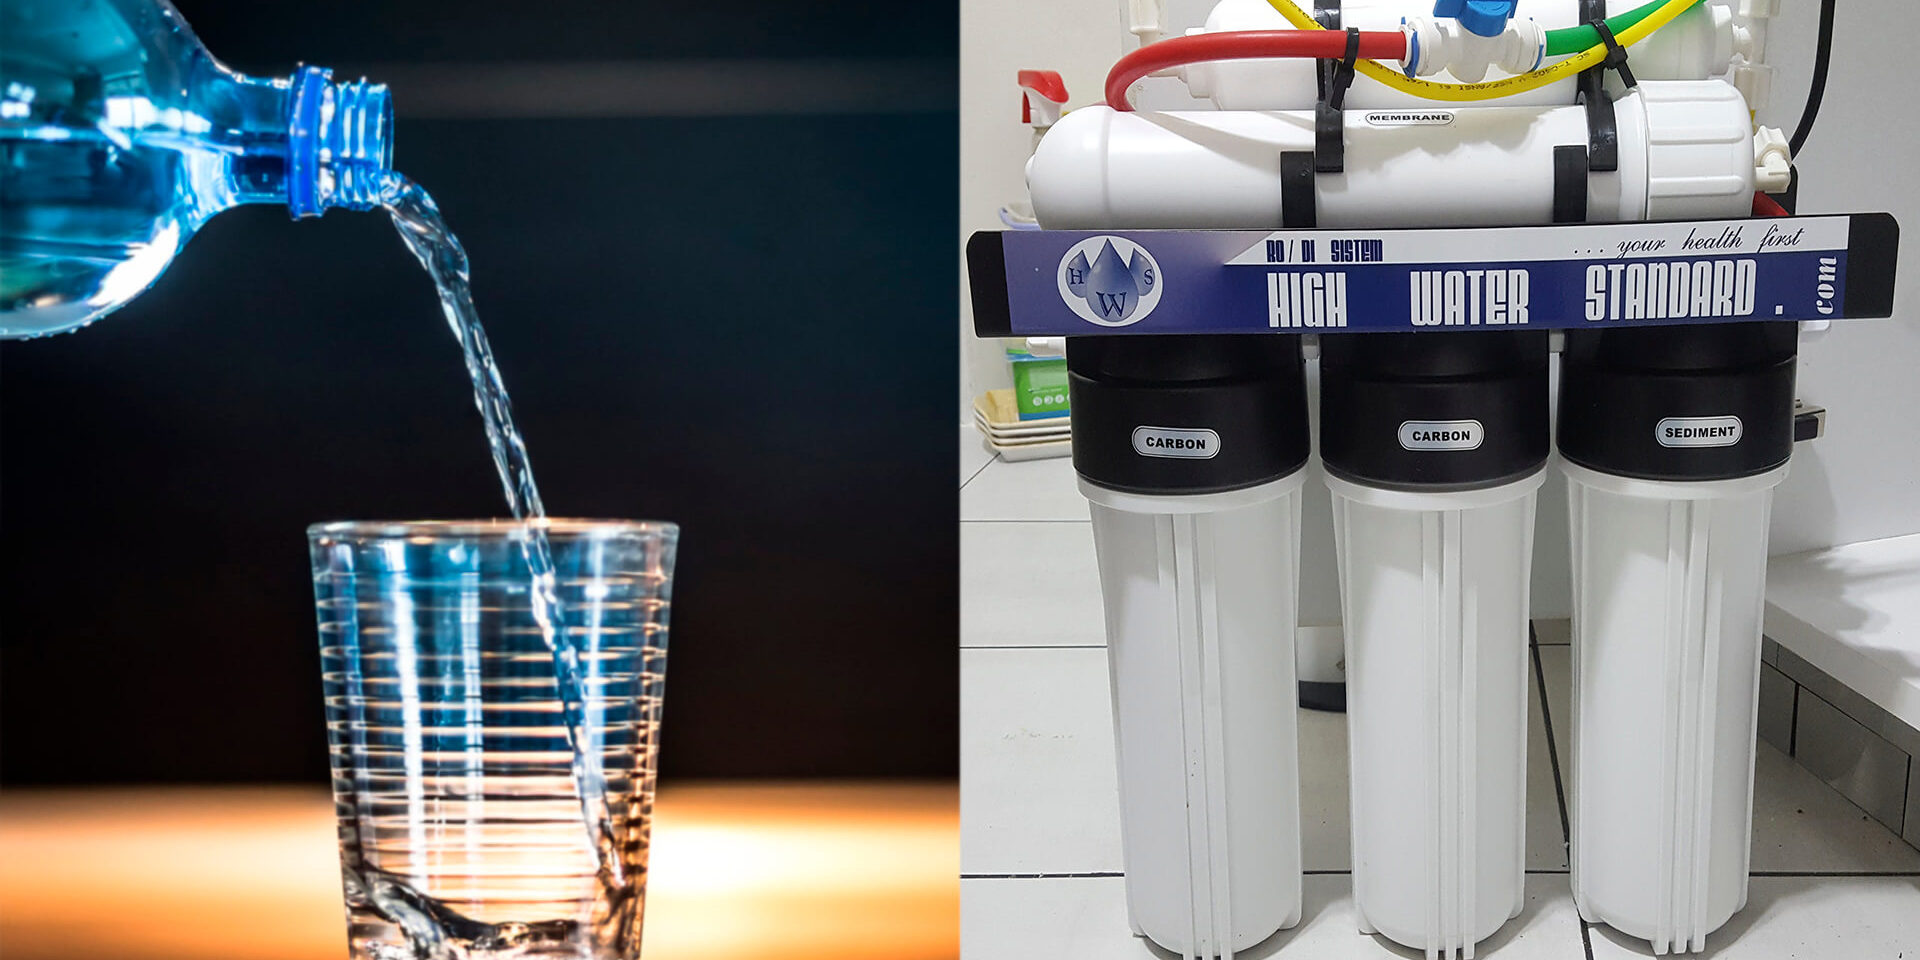 tap water vs filtered water facts